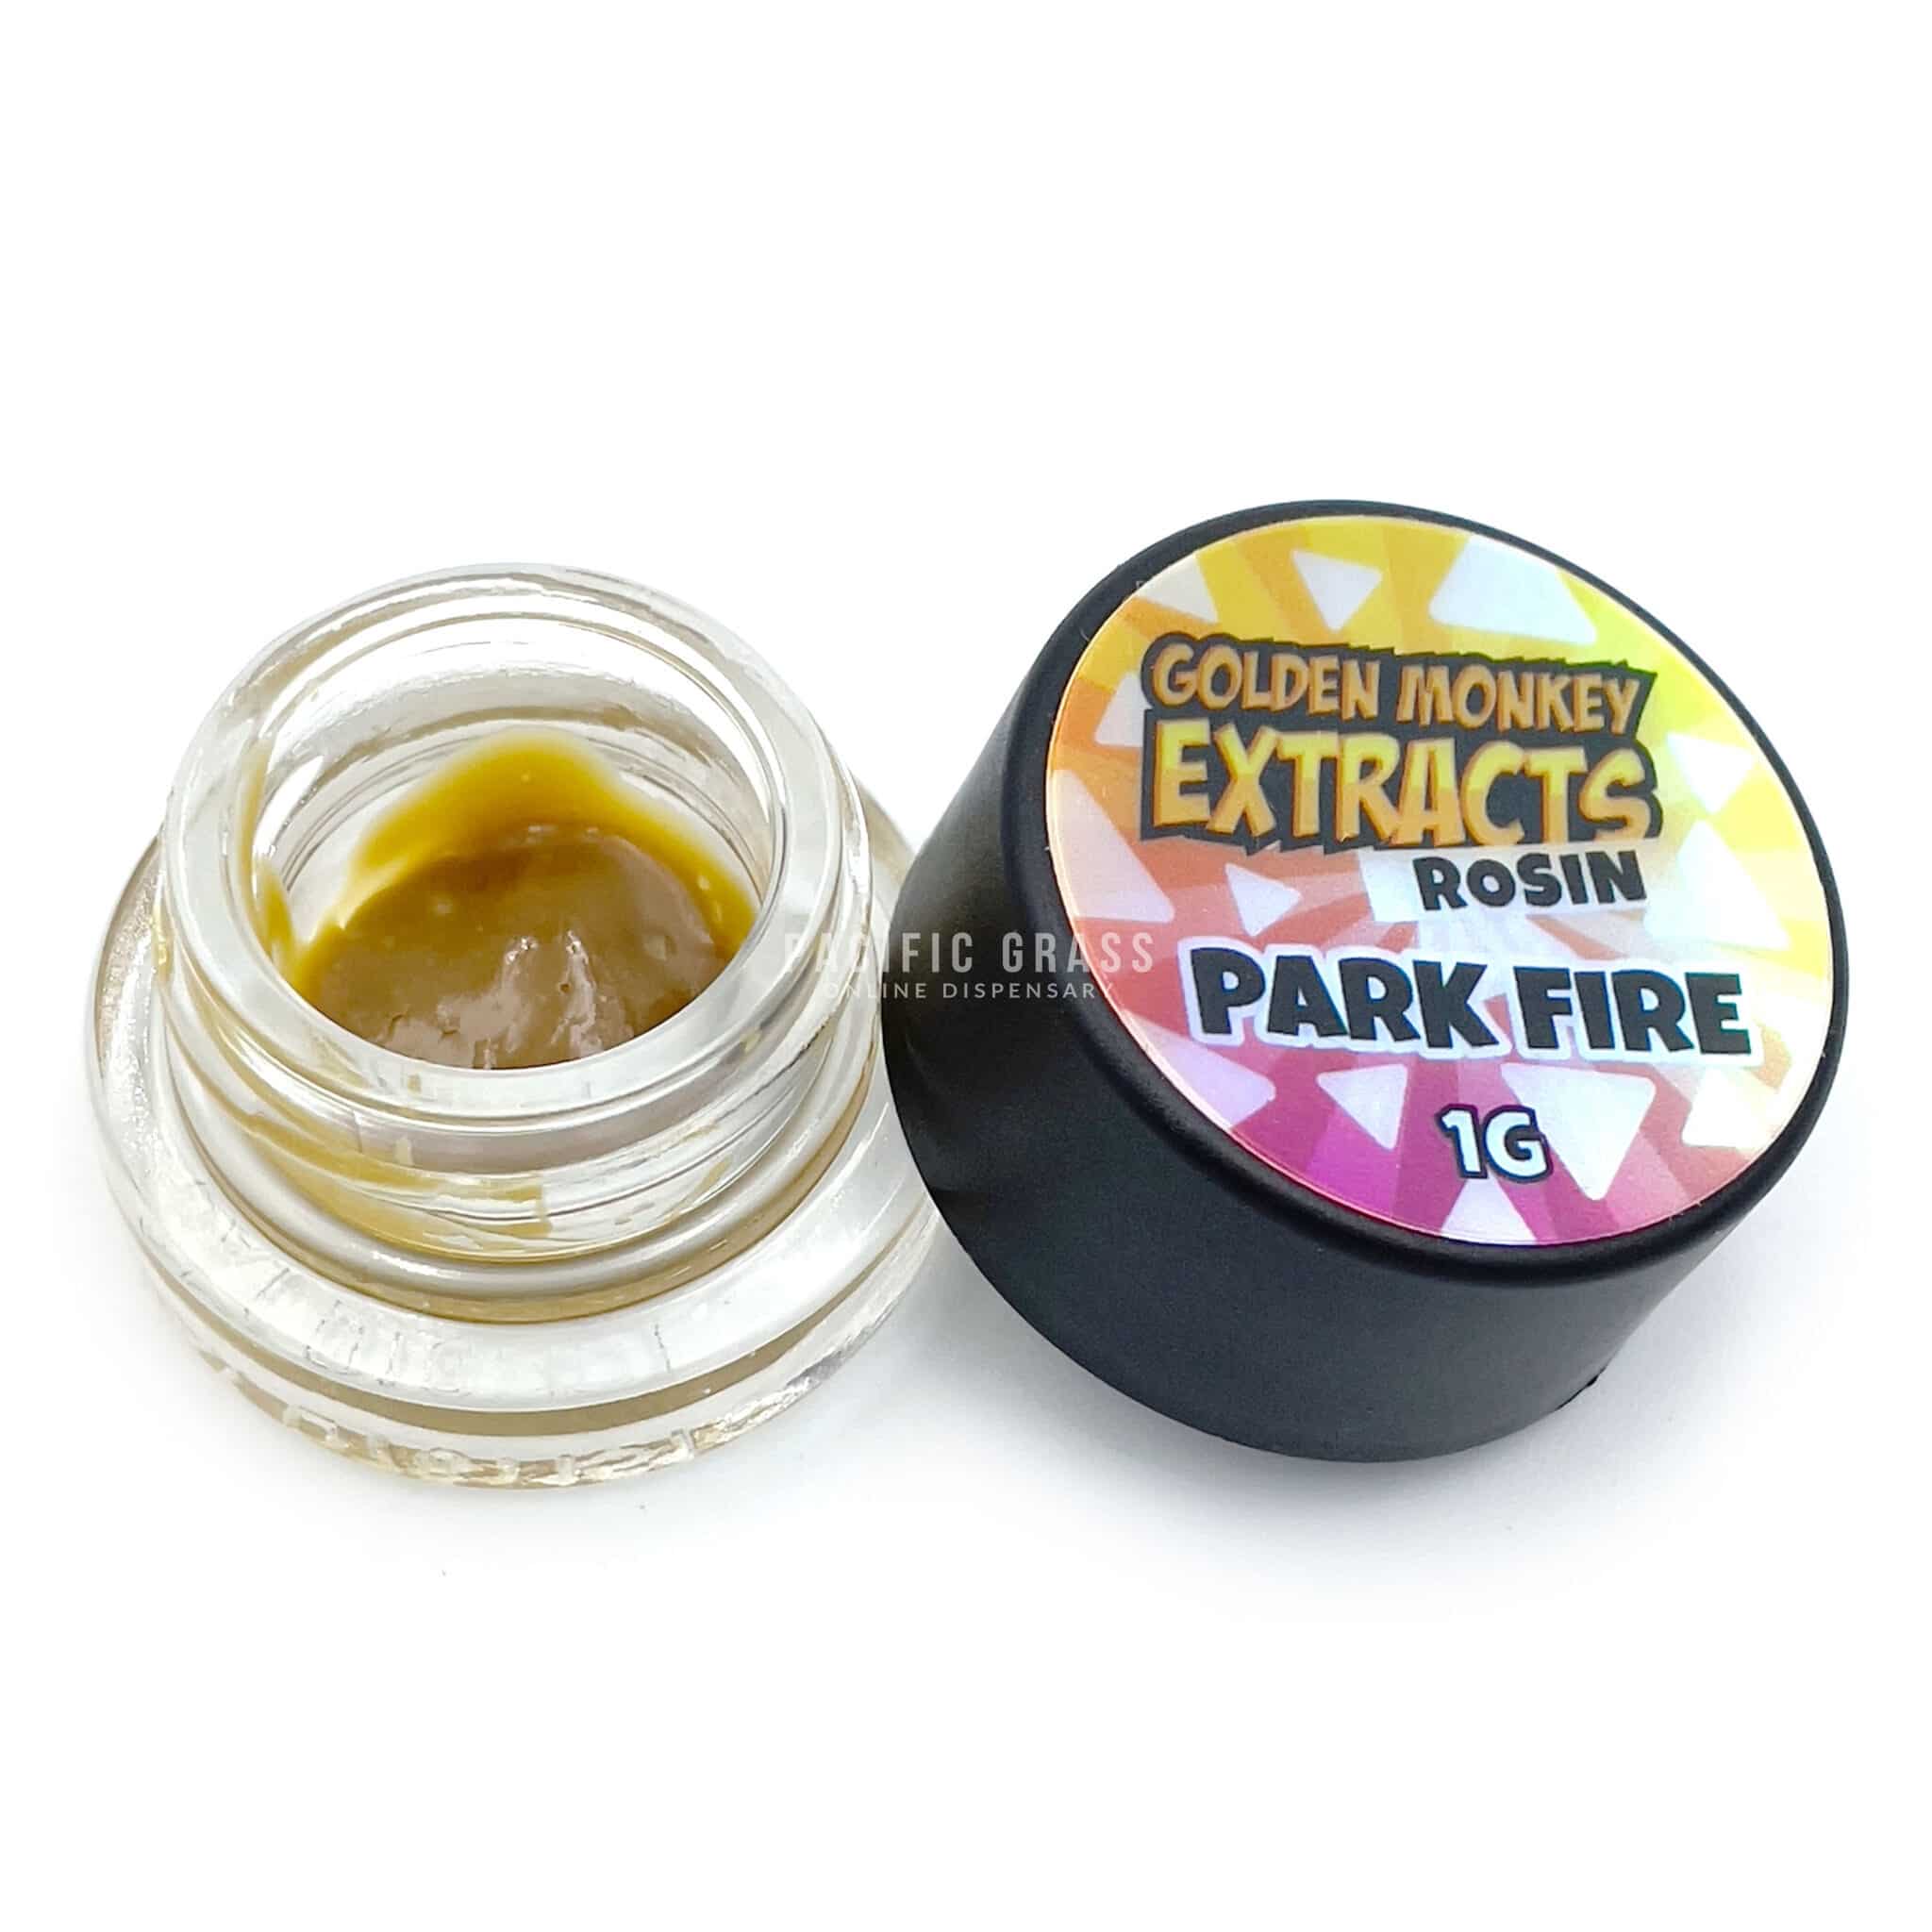 Golden Monkey Extracts Solventless Hash Rosin Park Fire